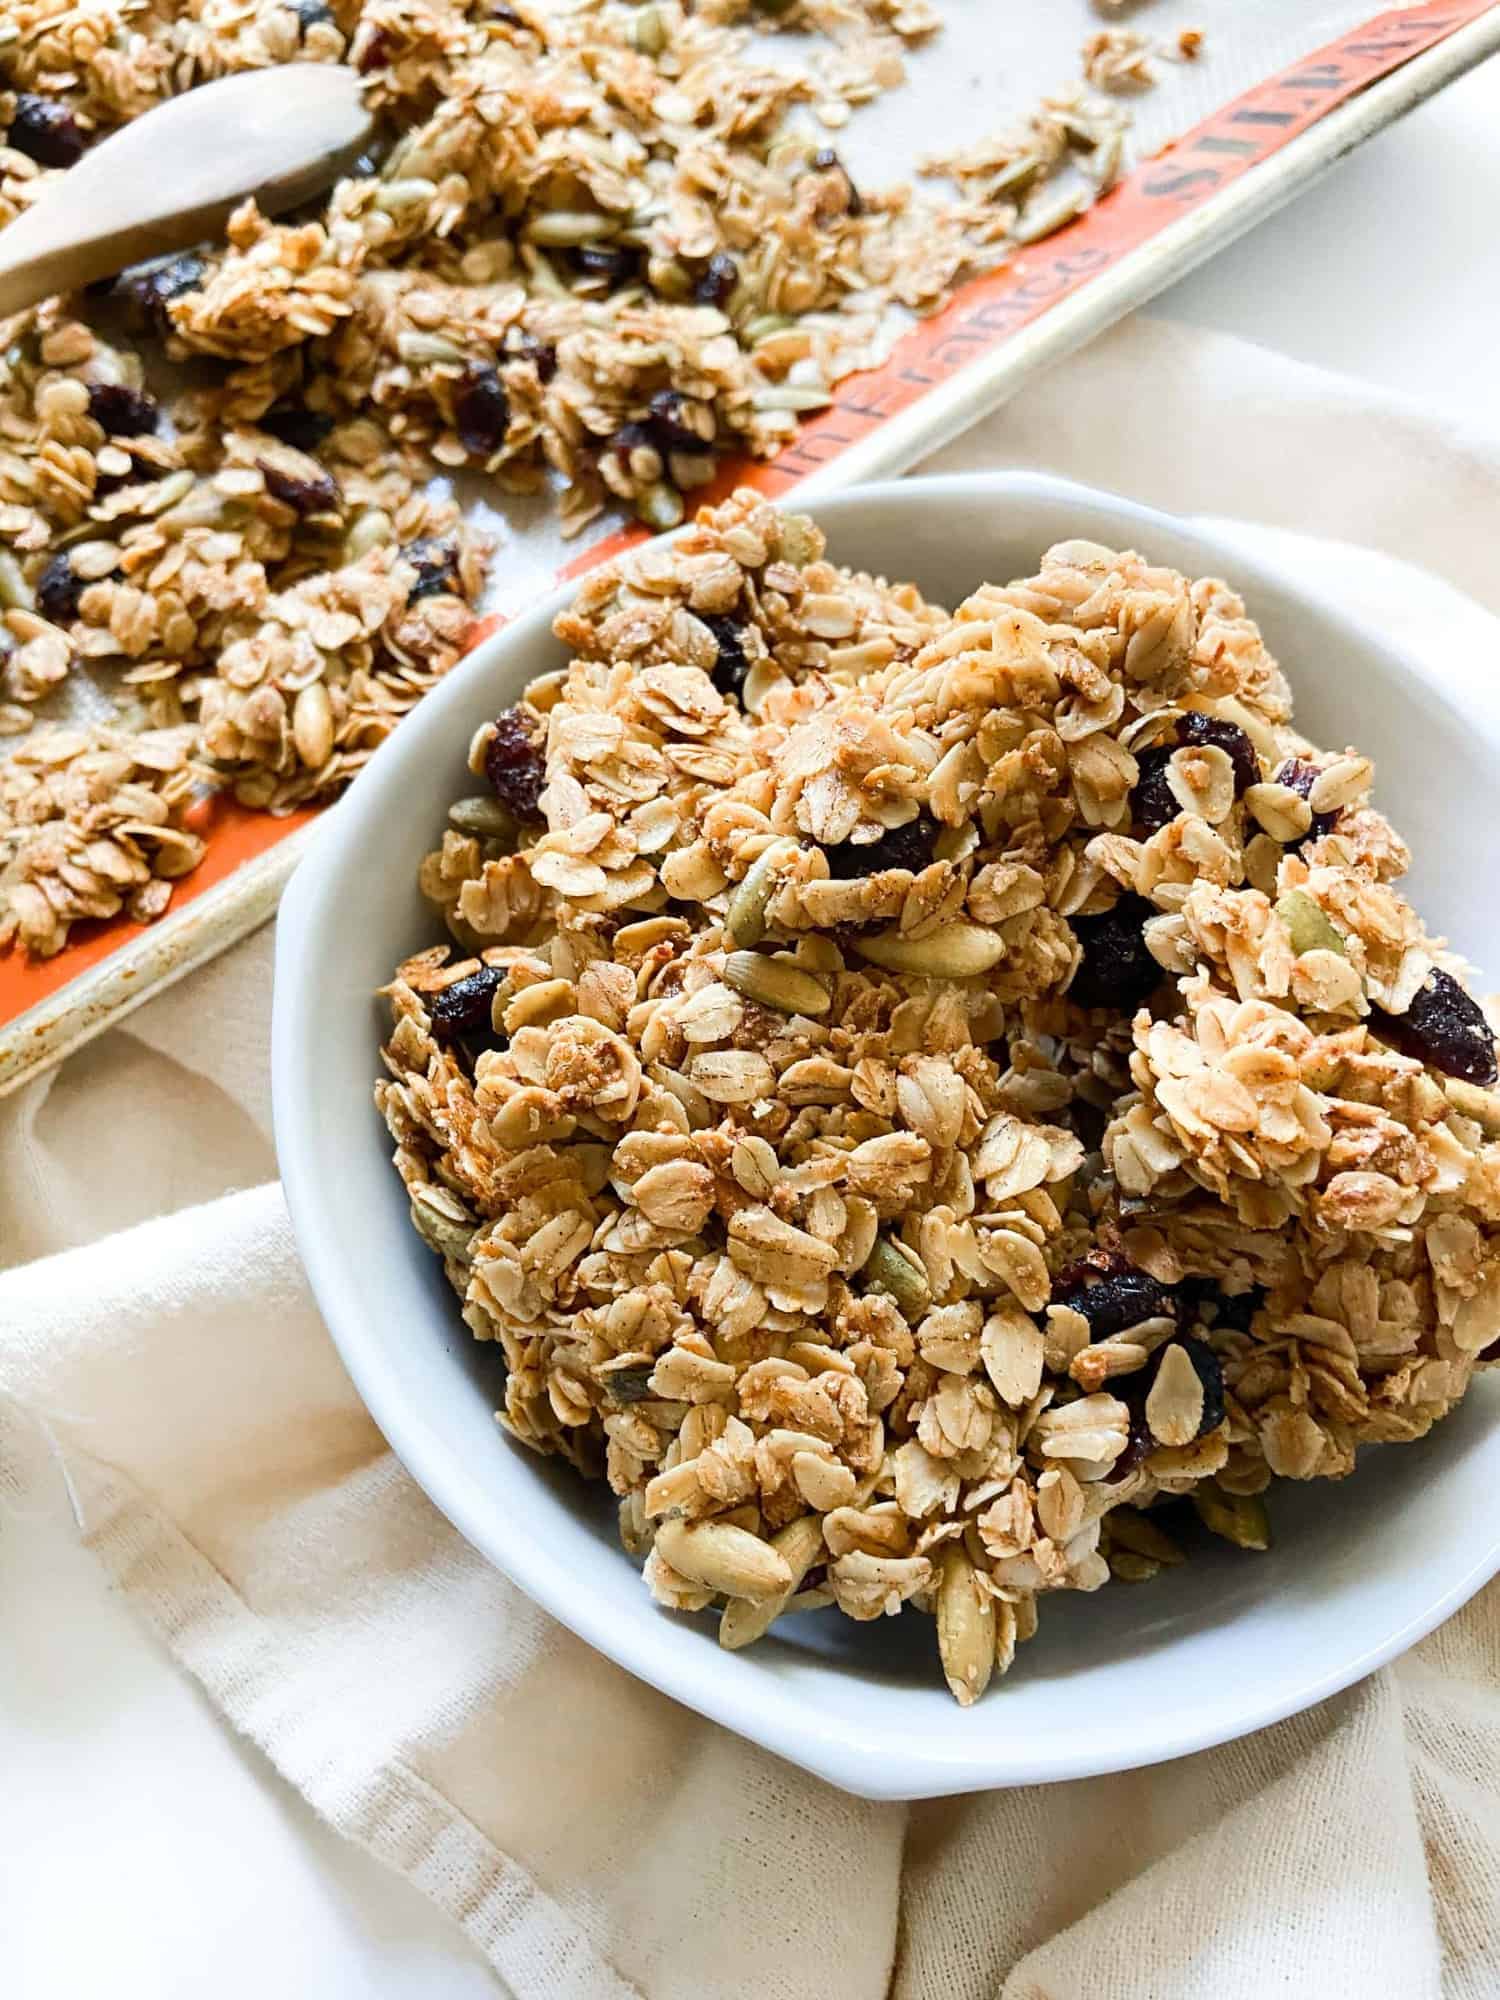 A bowl of pumpkin spice granola next to a sheet tray full of it.
